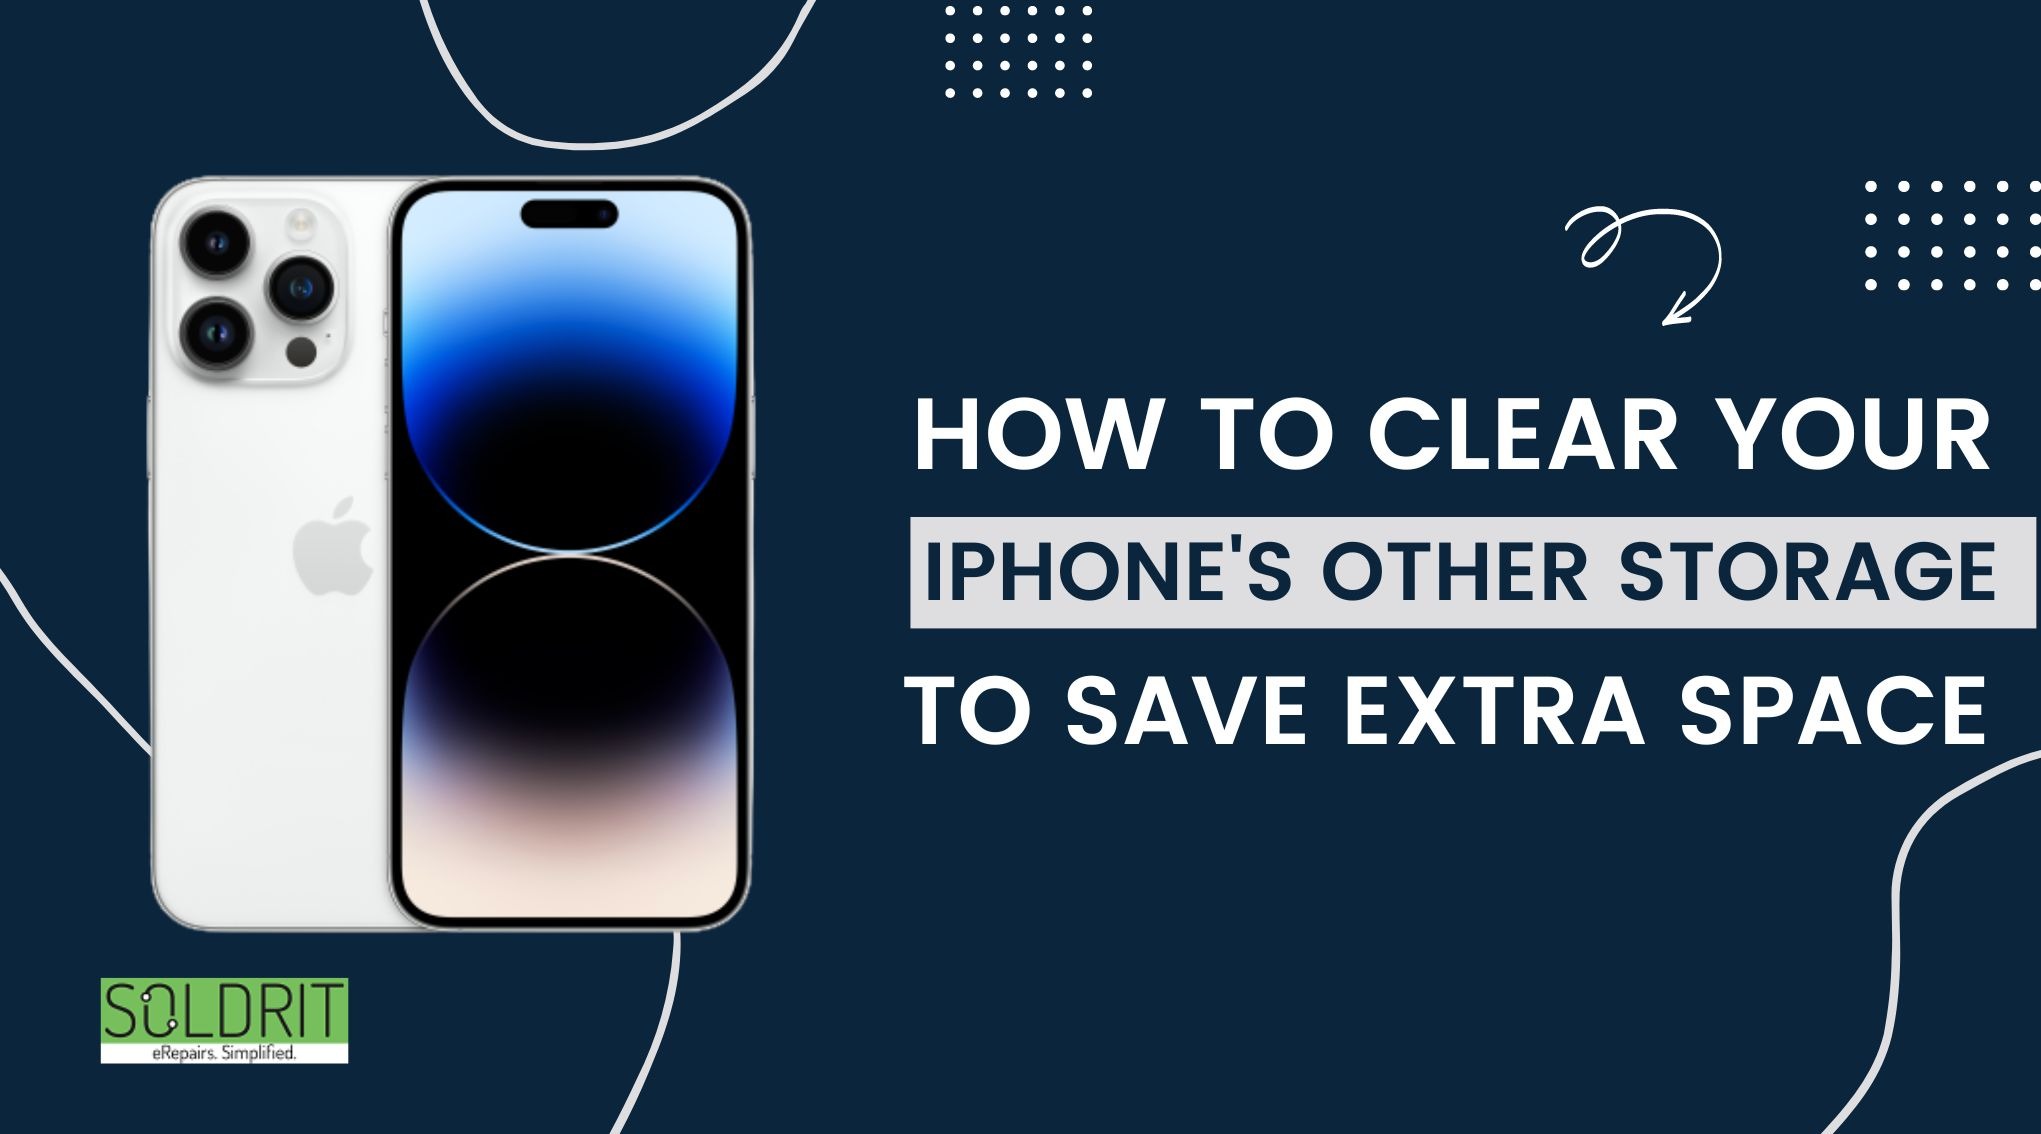 How To Clear Your iPhone’s Other Storage To Save Extra Space